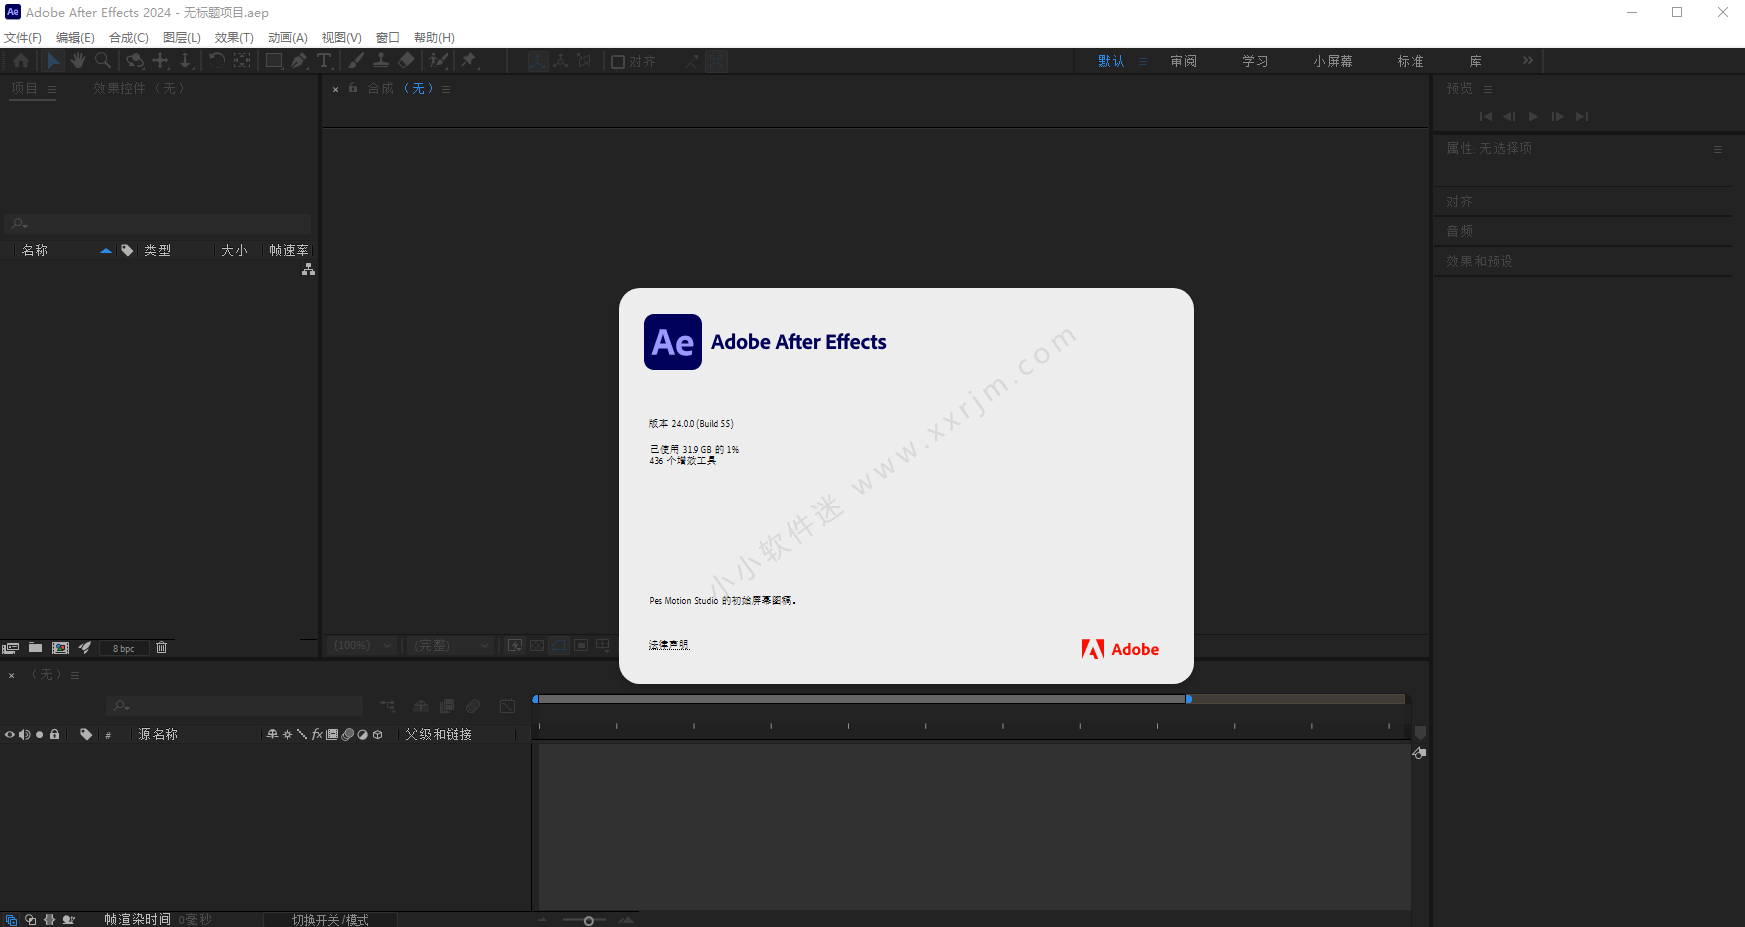 Adobe After Effects 2024 v24.0.0.55 instal the new for mac